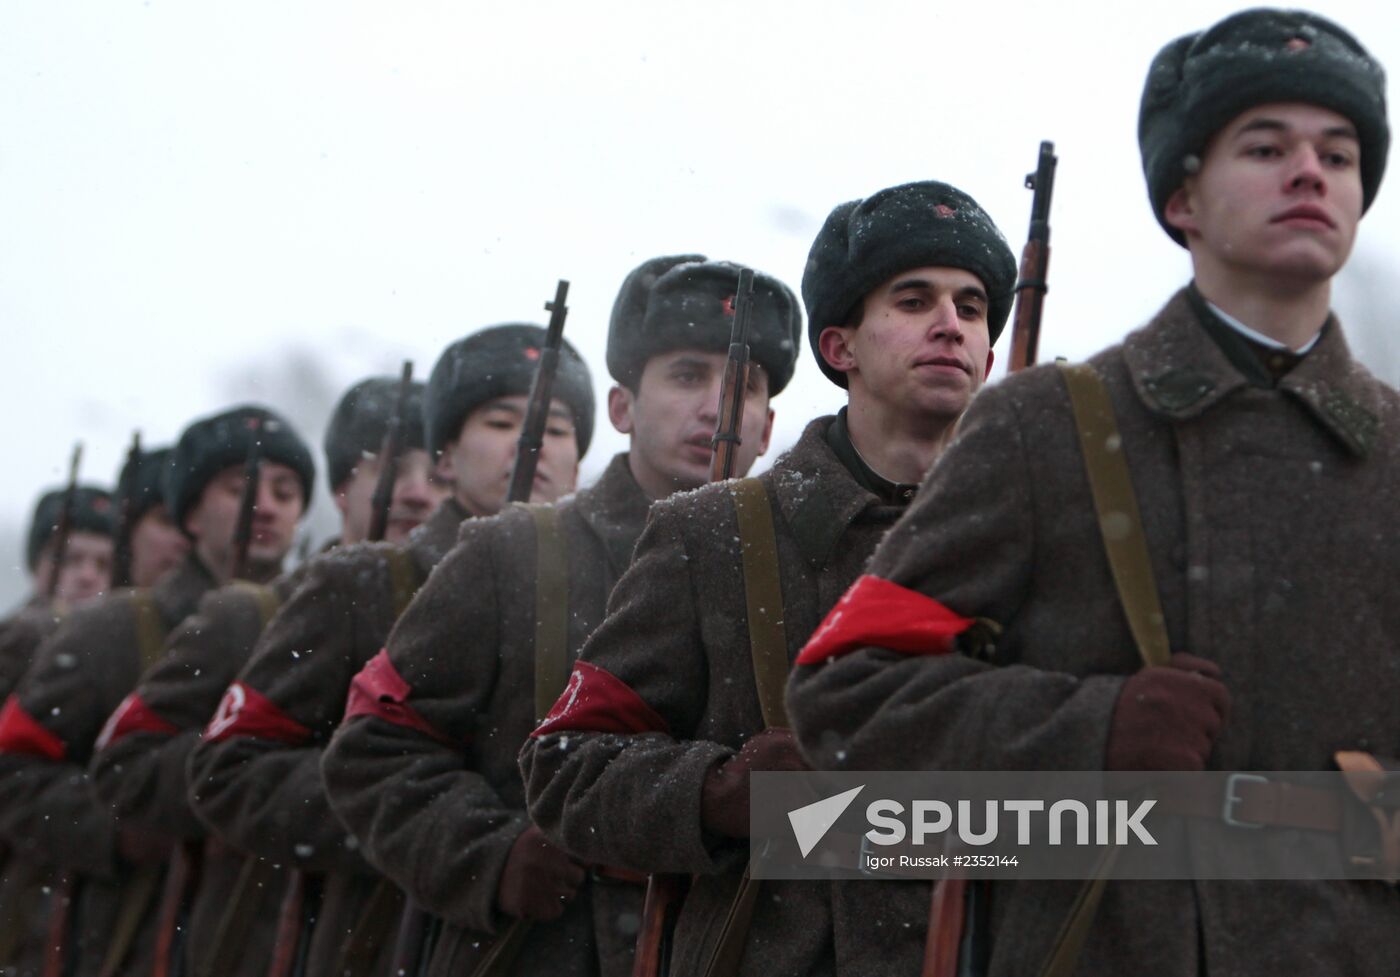 Final rehearsal of parade marking 70th anniversary of lifting of Siege of Leningrad